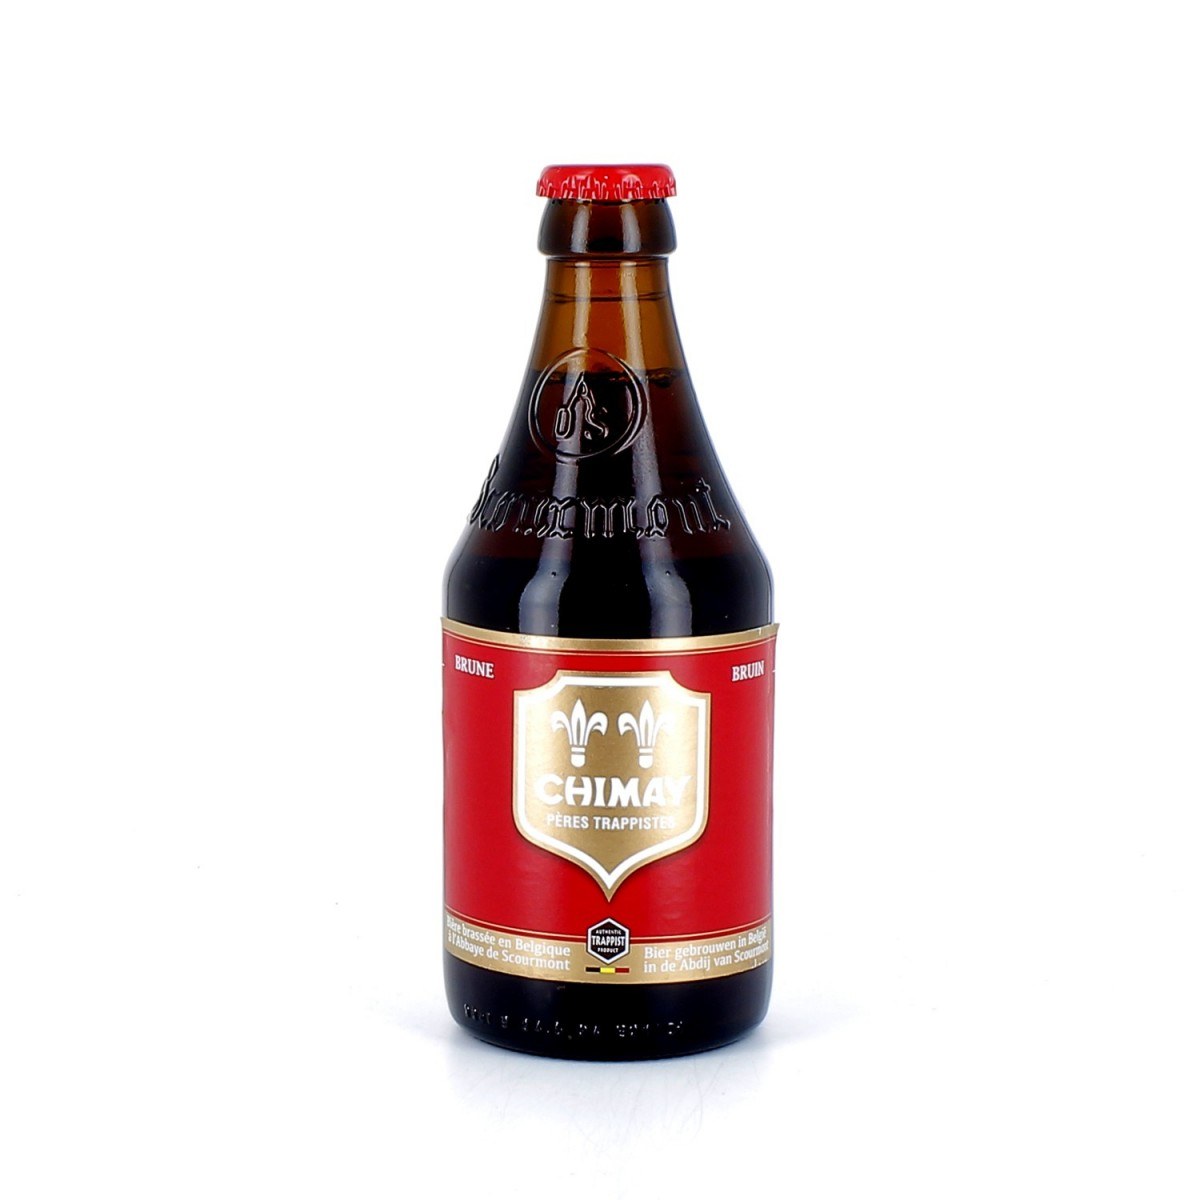 Chimay Rouge